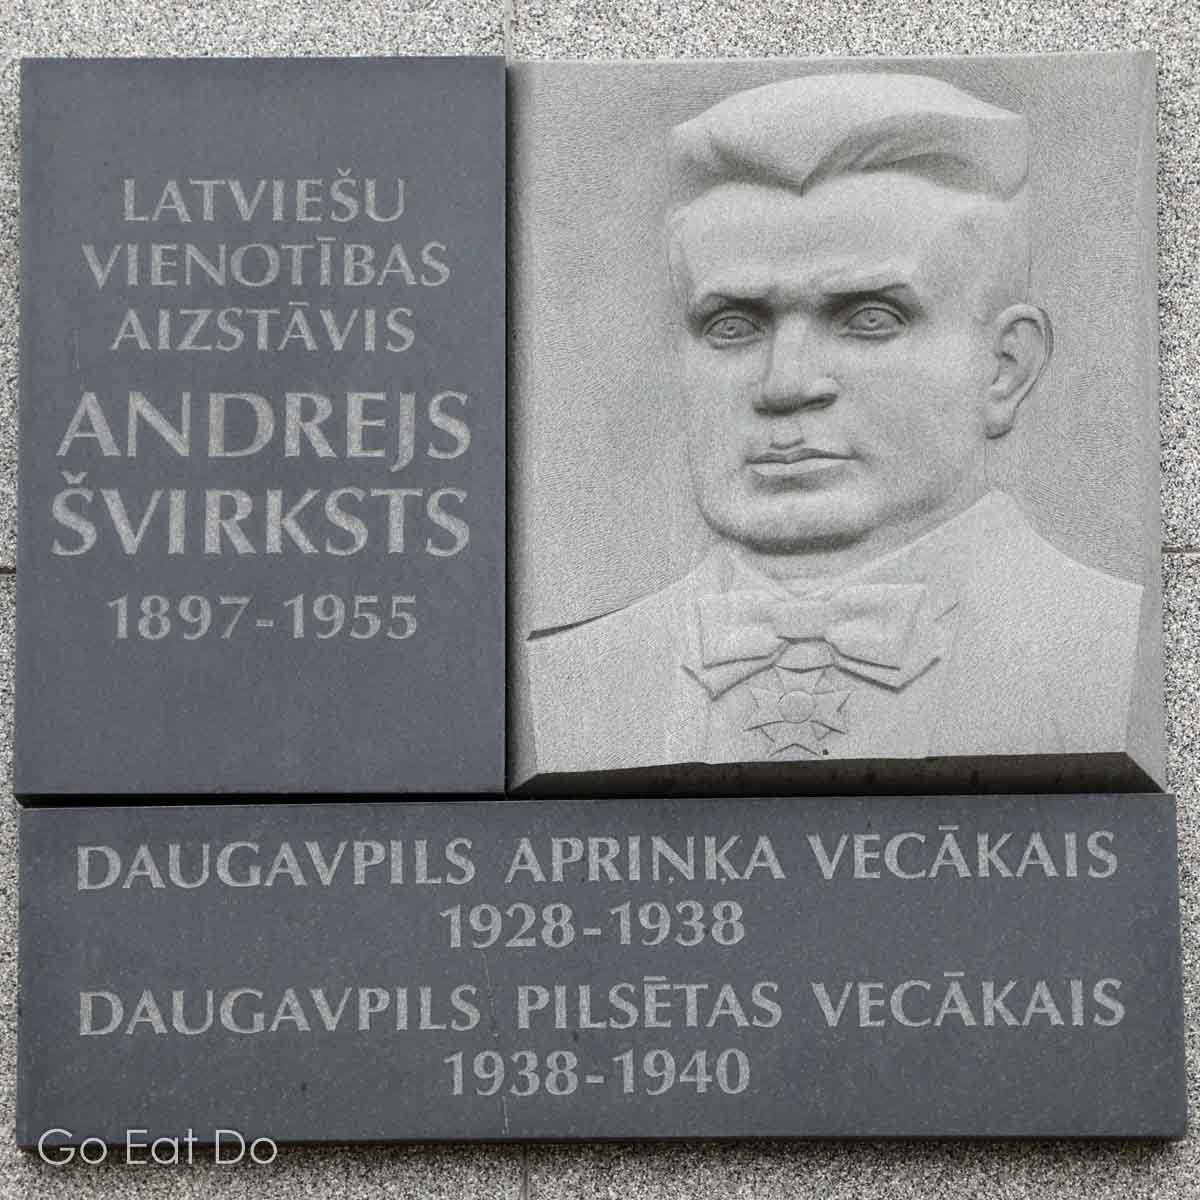 Plaque honouring Andrejs Svirksts, the architect of Unity House, in Daugavpils, Latvia.